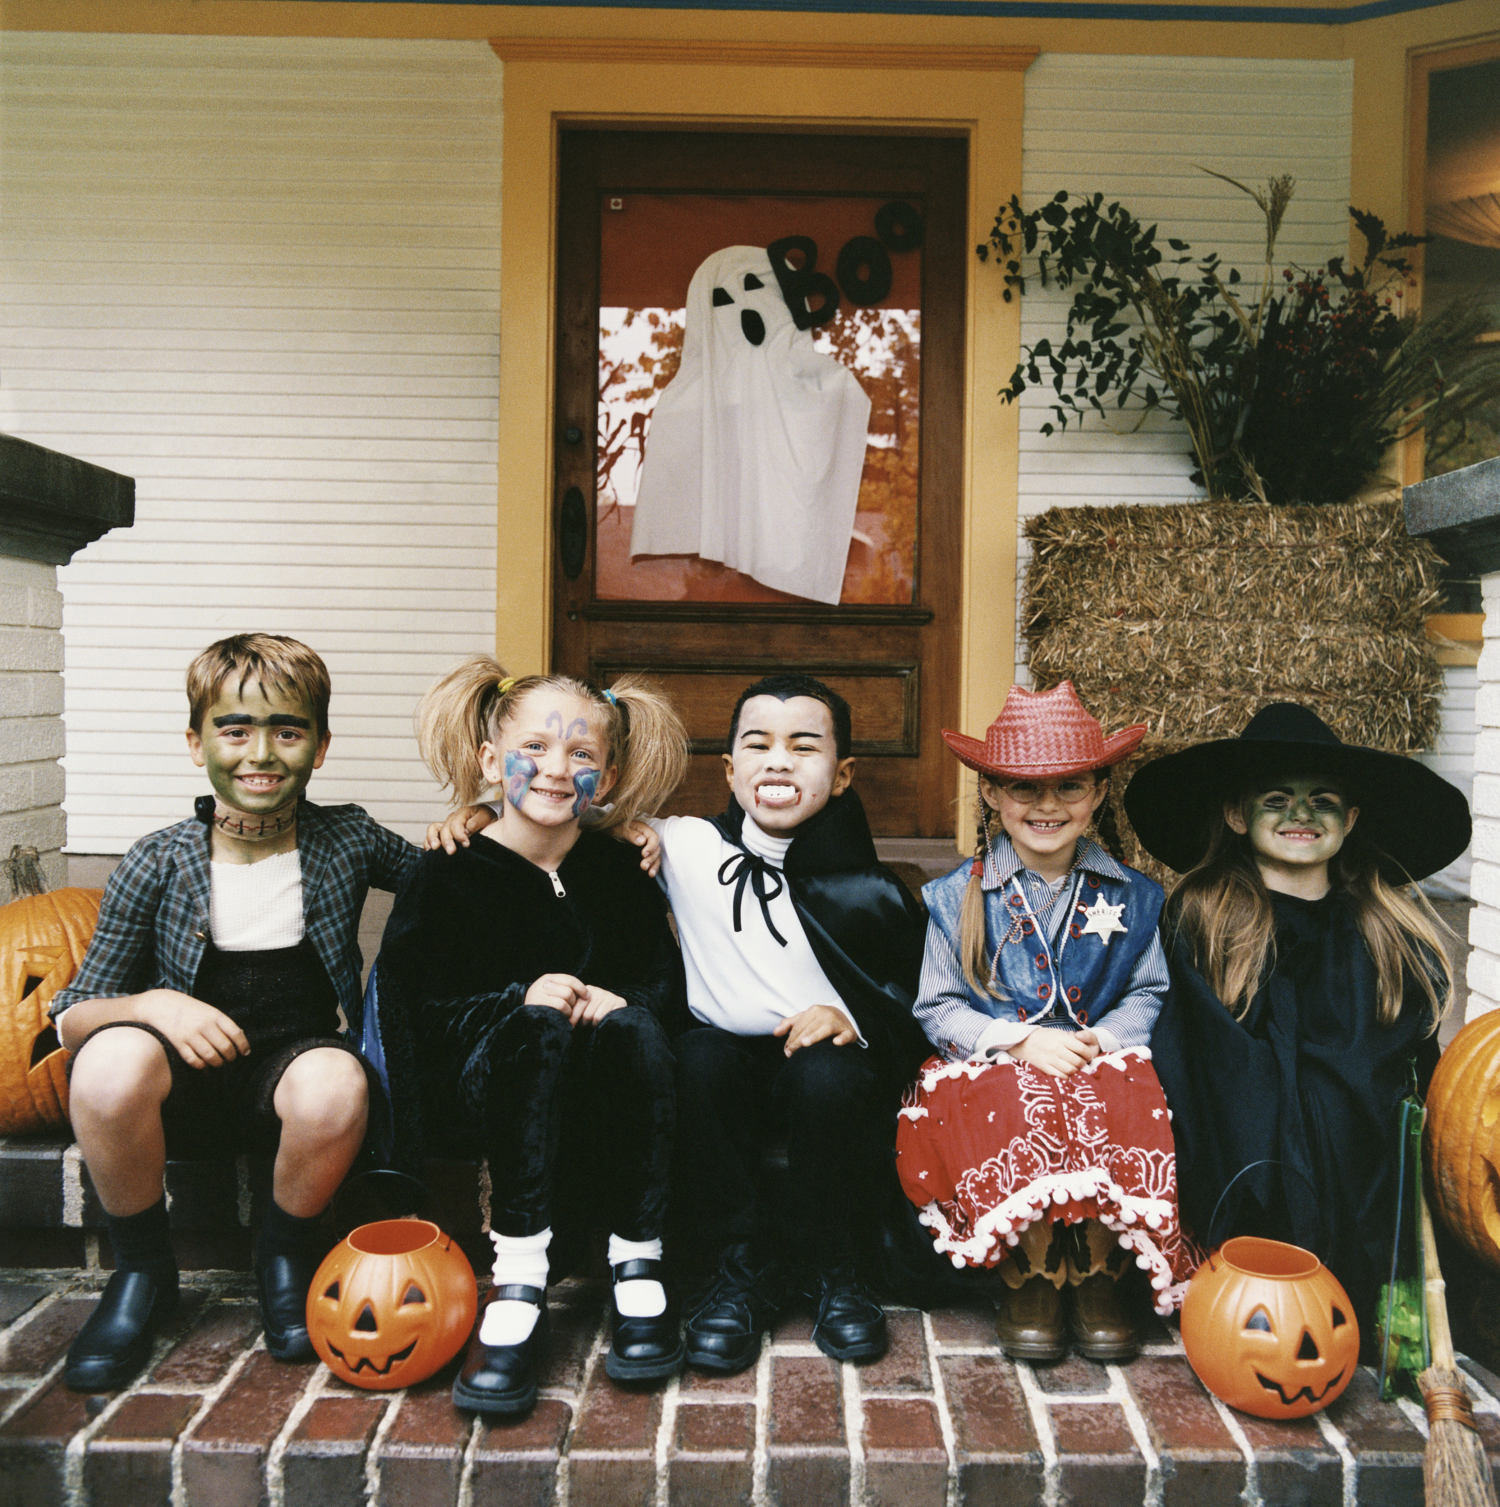 What time does trickortreating start and end on Halloween?